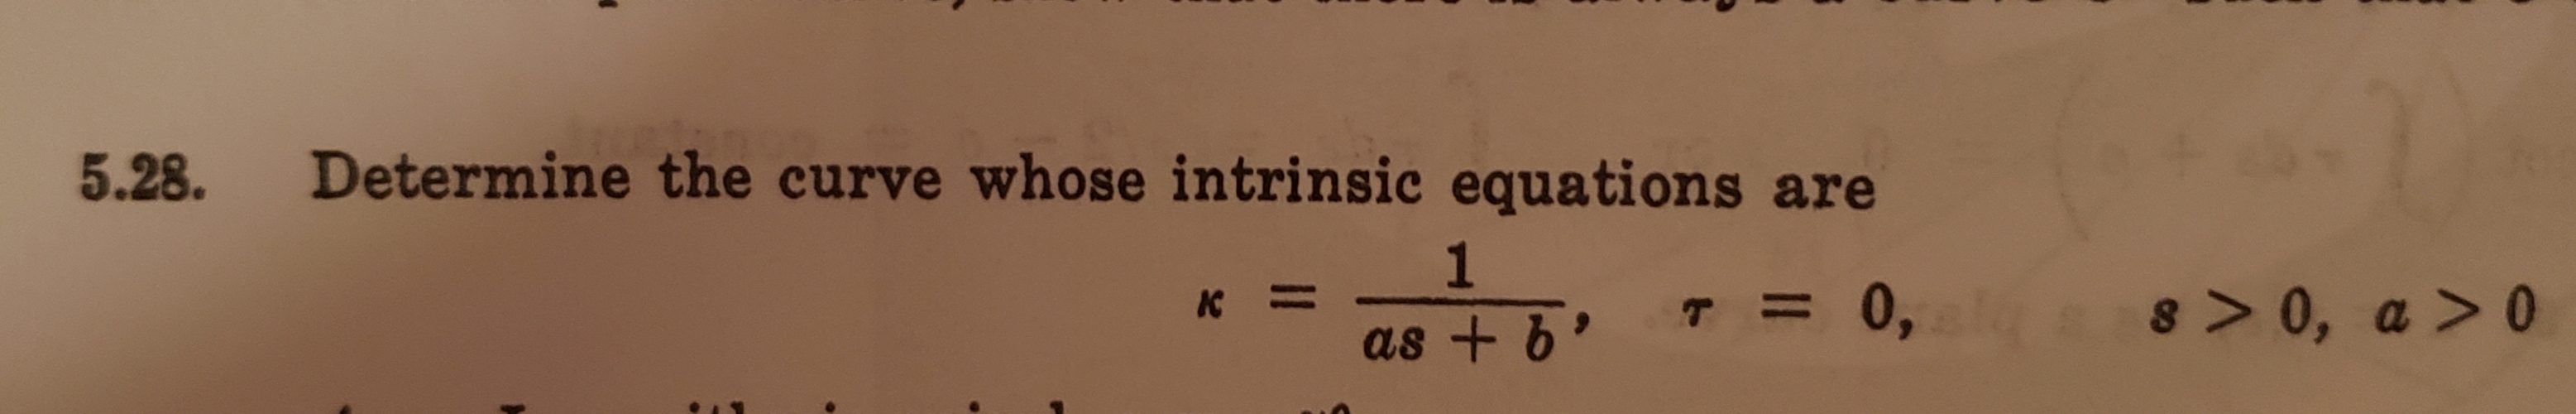 Determine the curve whose intrinsic equations are
5.28.
1
a8 > 0, a >0
0,
K
11
as +
